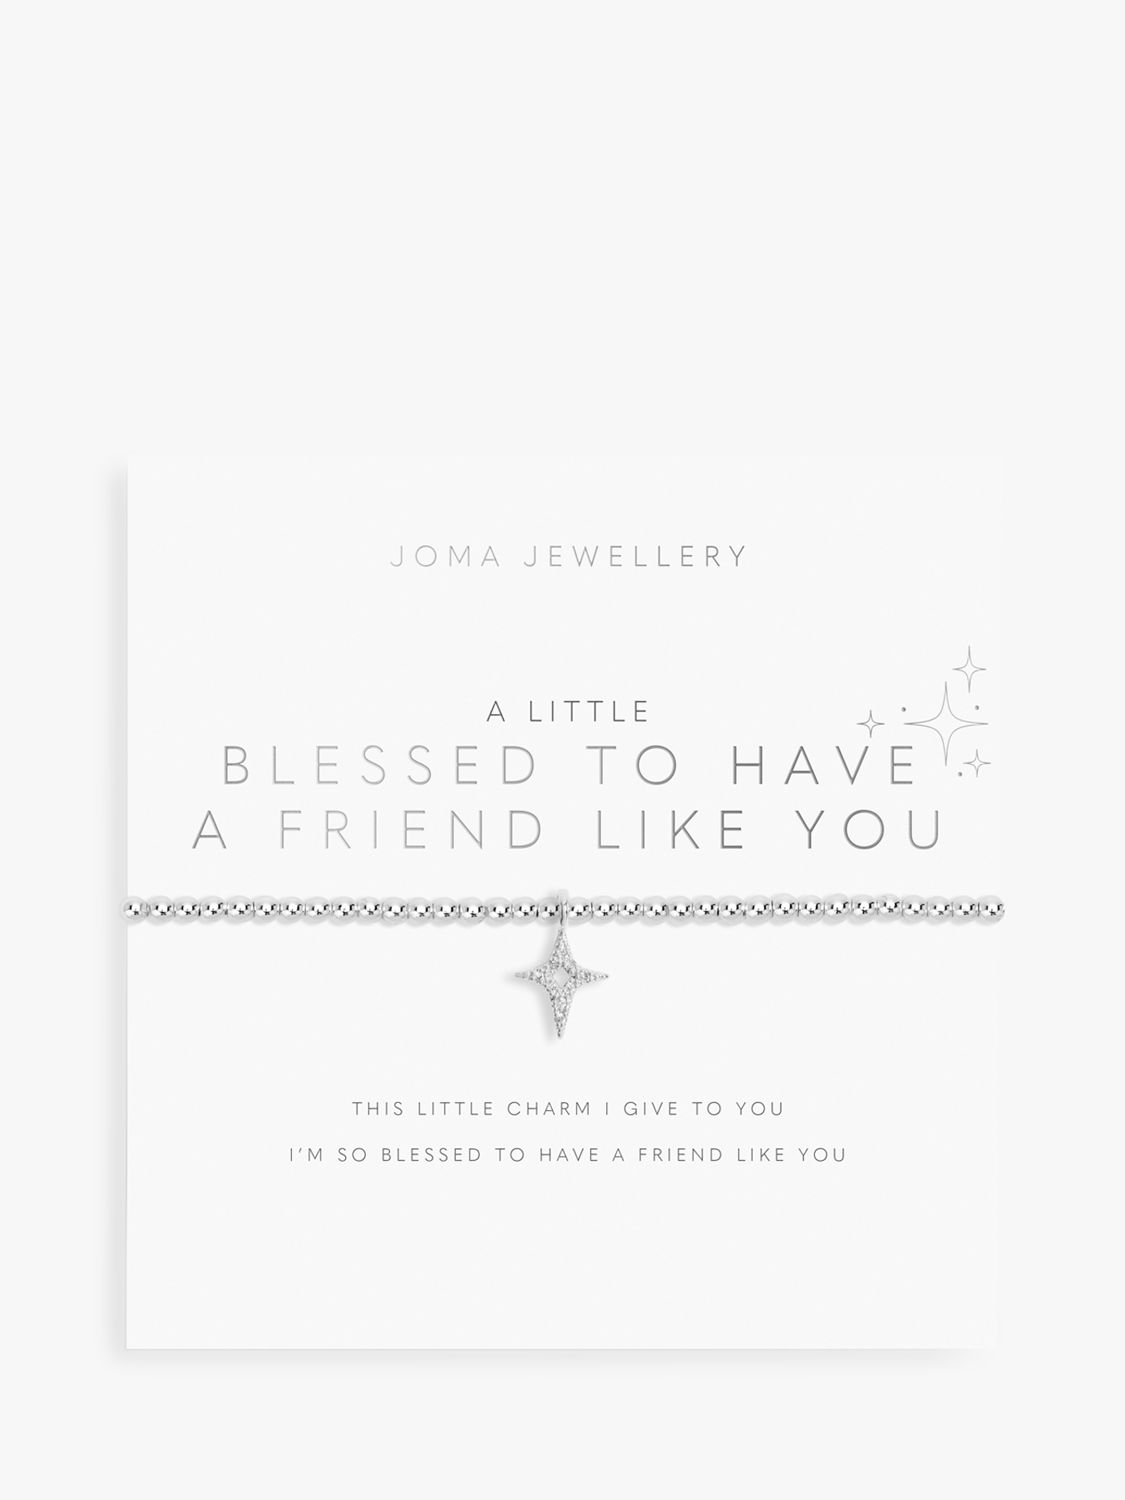 Joma Jewellery 'Blessed To Have A Friend Like You' Charm Bracelet, Silver